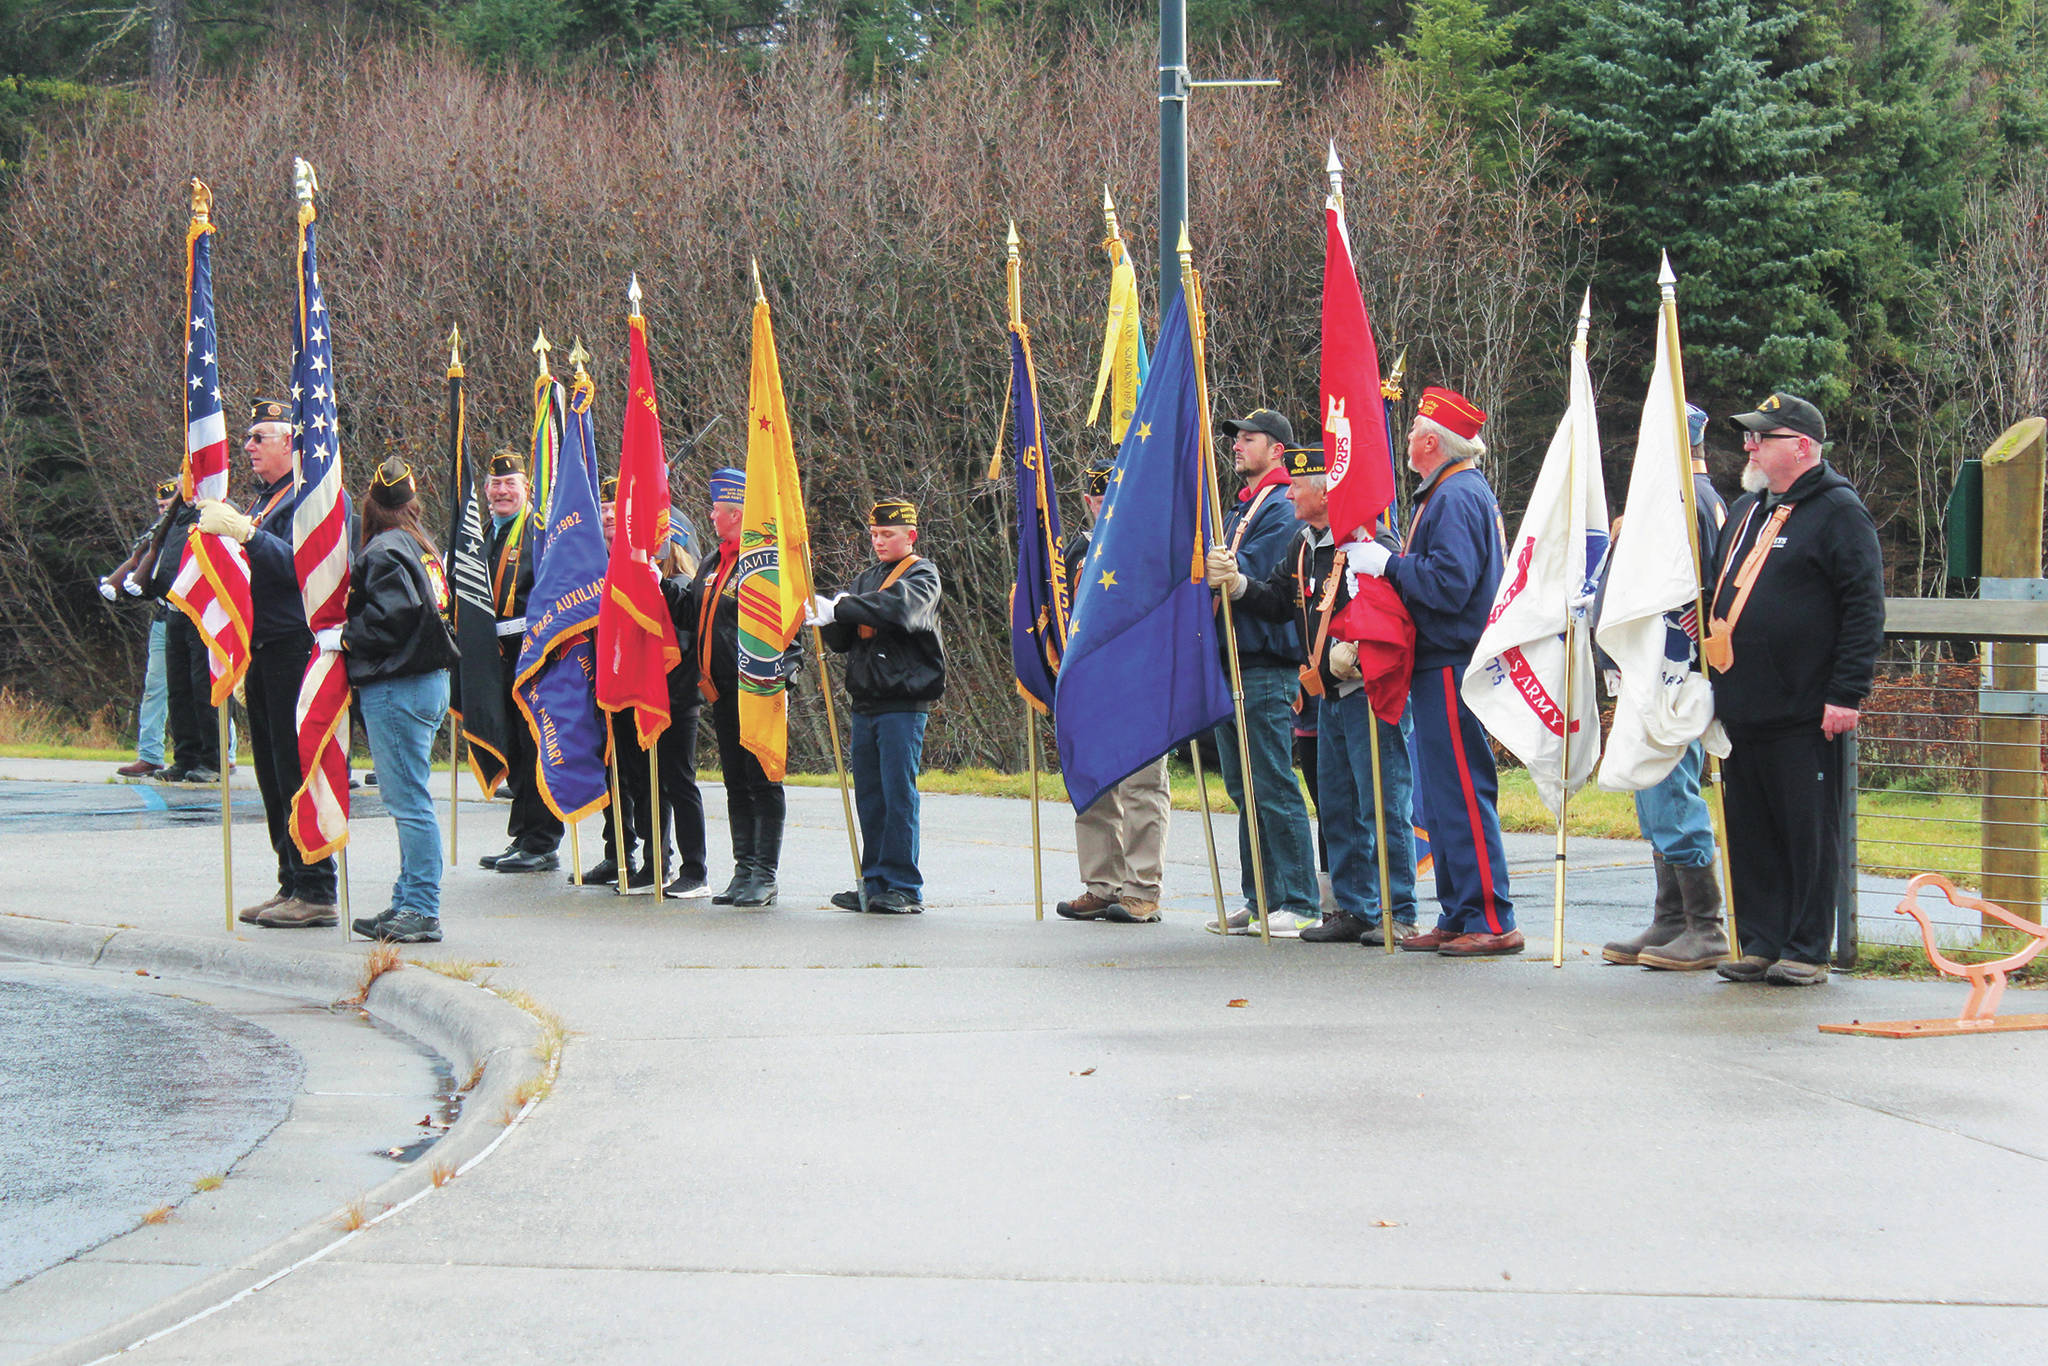 Participants in this year's Veterans Day celebration assemble at the Alaska Islands & Ocean Visitor Center on Wednesday, Nov. 11, 2020 in Homer, Alaska. (Photo by Megan Pacer/Homer News)